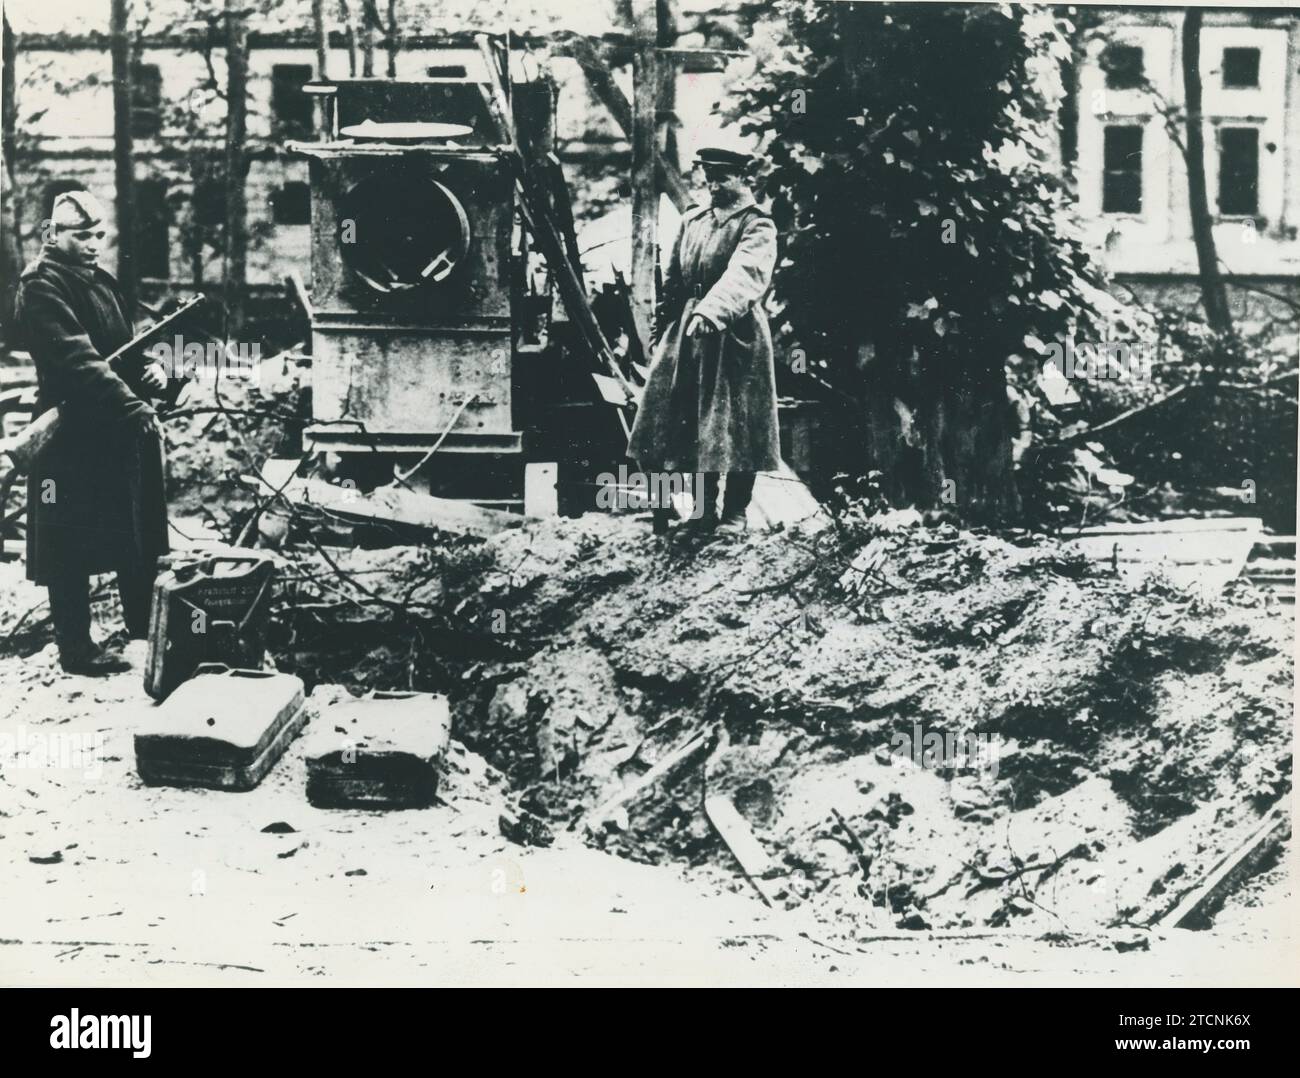 Berlin (Germany), 04/29/1945. Soviet soldiers pose in front of the pile of earth where Adolf Hitler committed suicide with Eva Braun, at the entrance to the bunker. Credit: Album / Archivo ABC Stock Photo